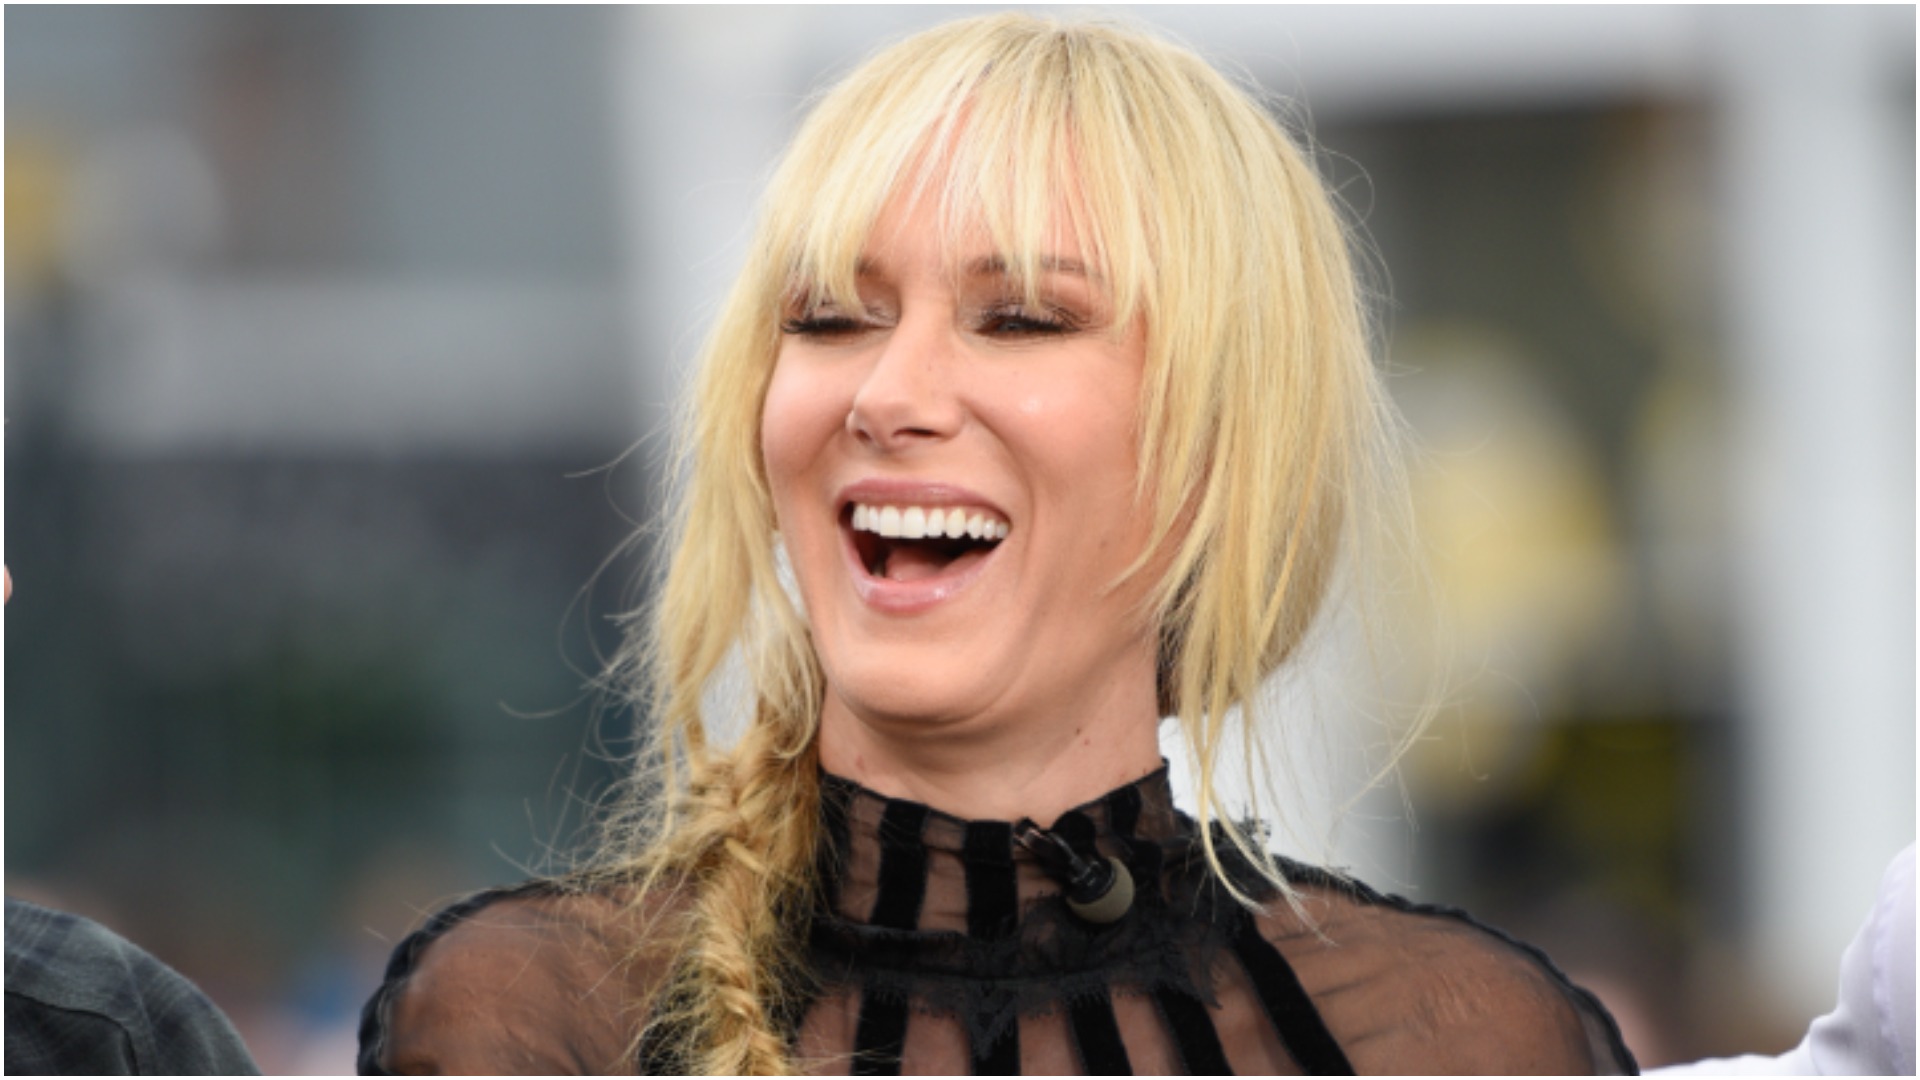 Kimberly Stewart's Oval Engagement Ring Likely Valued at $170,000, Diamond Expert Says